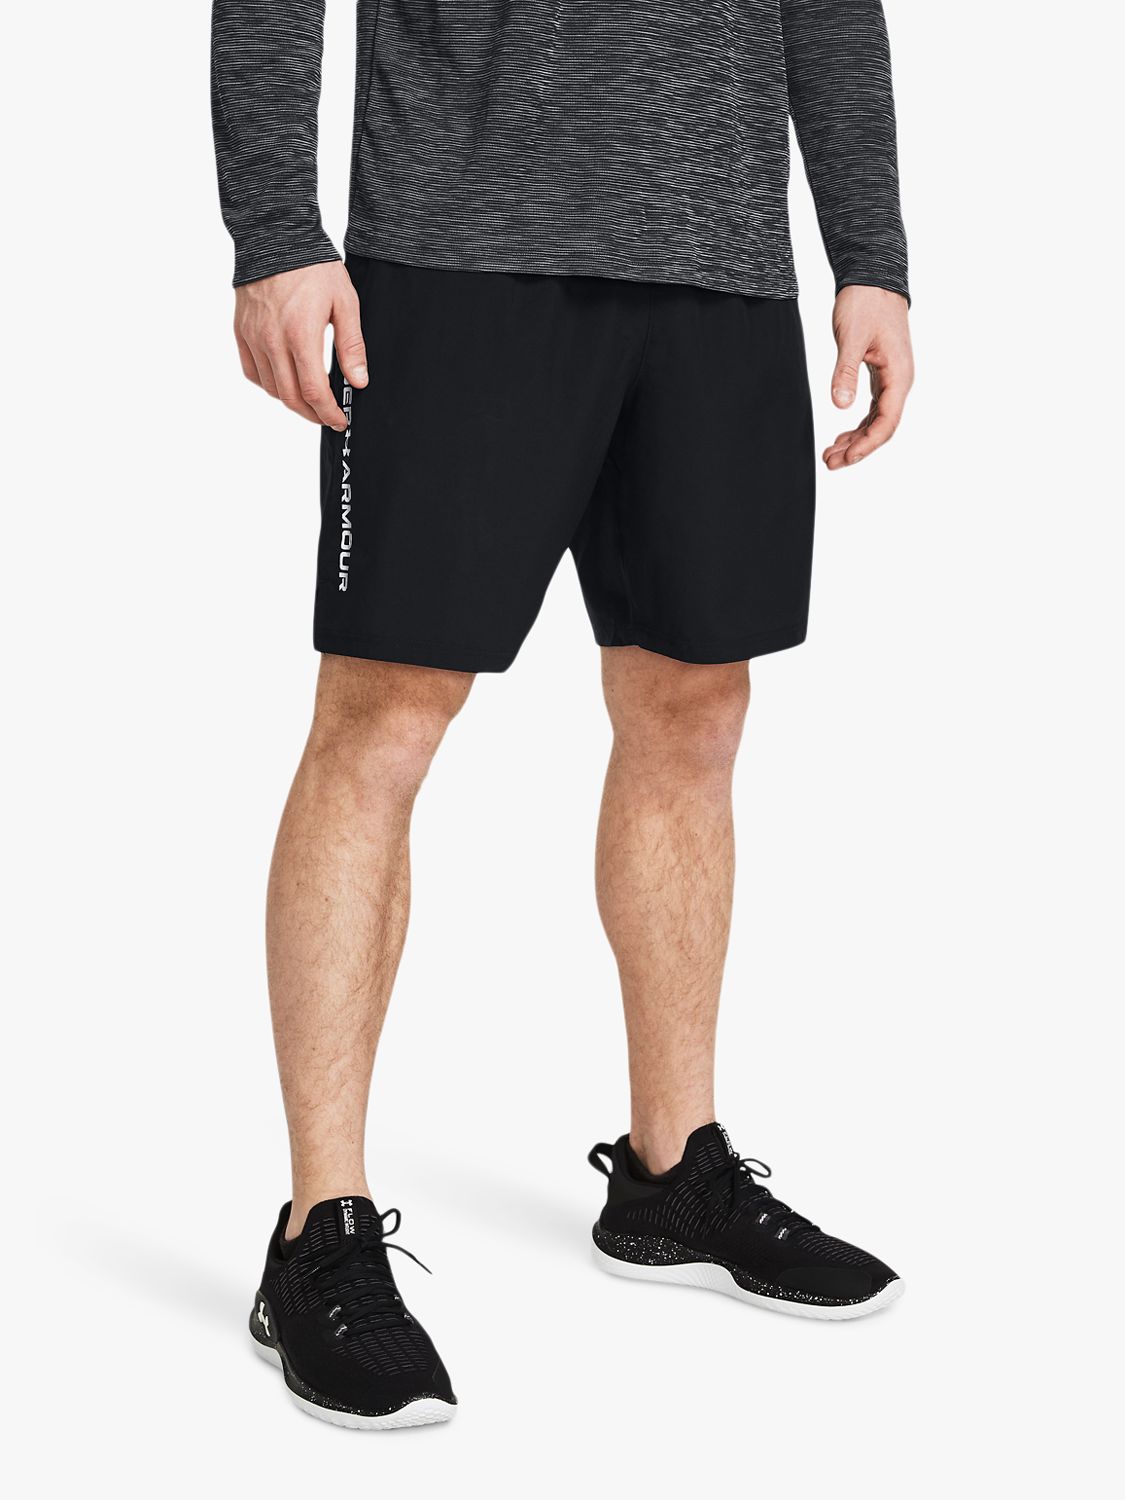 Under Armour Lightweight Woven Shorts, Black/White, S